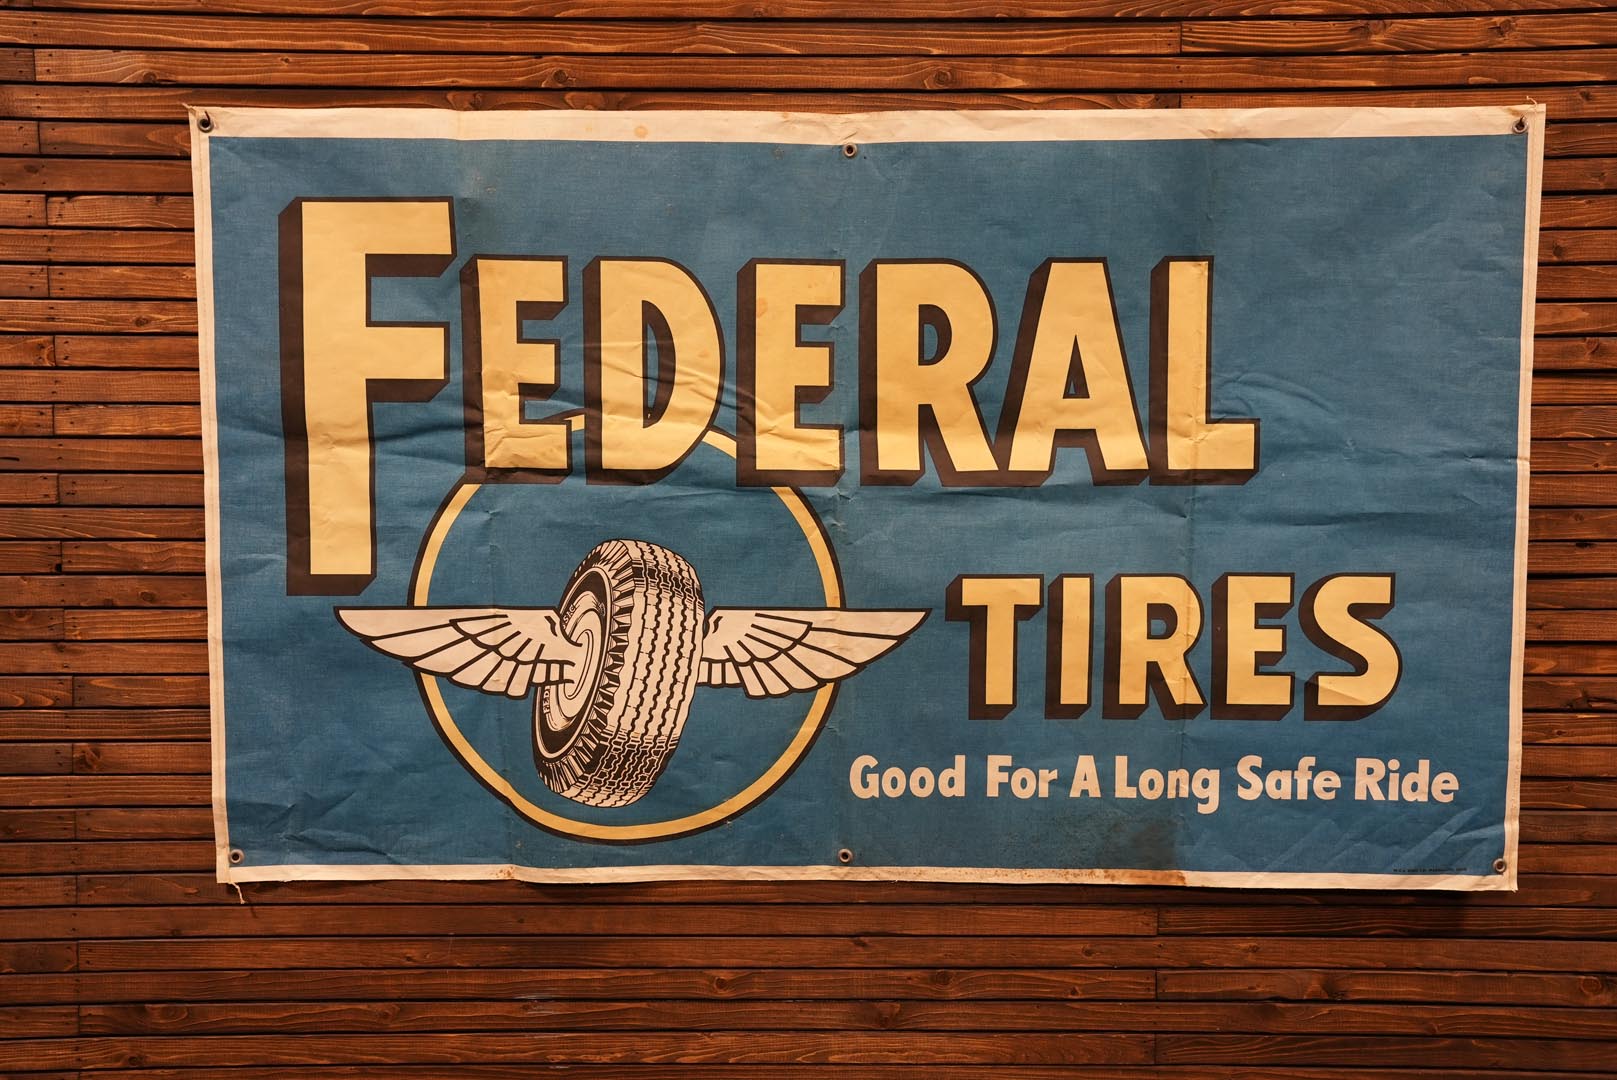 1960s Federal Tires Advertising Banner